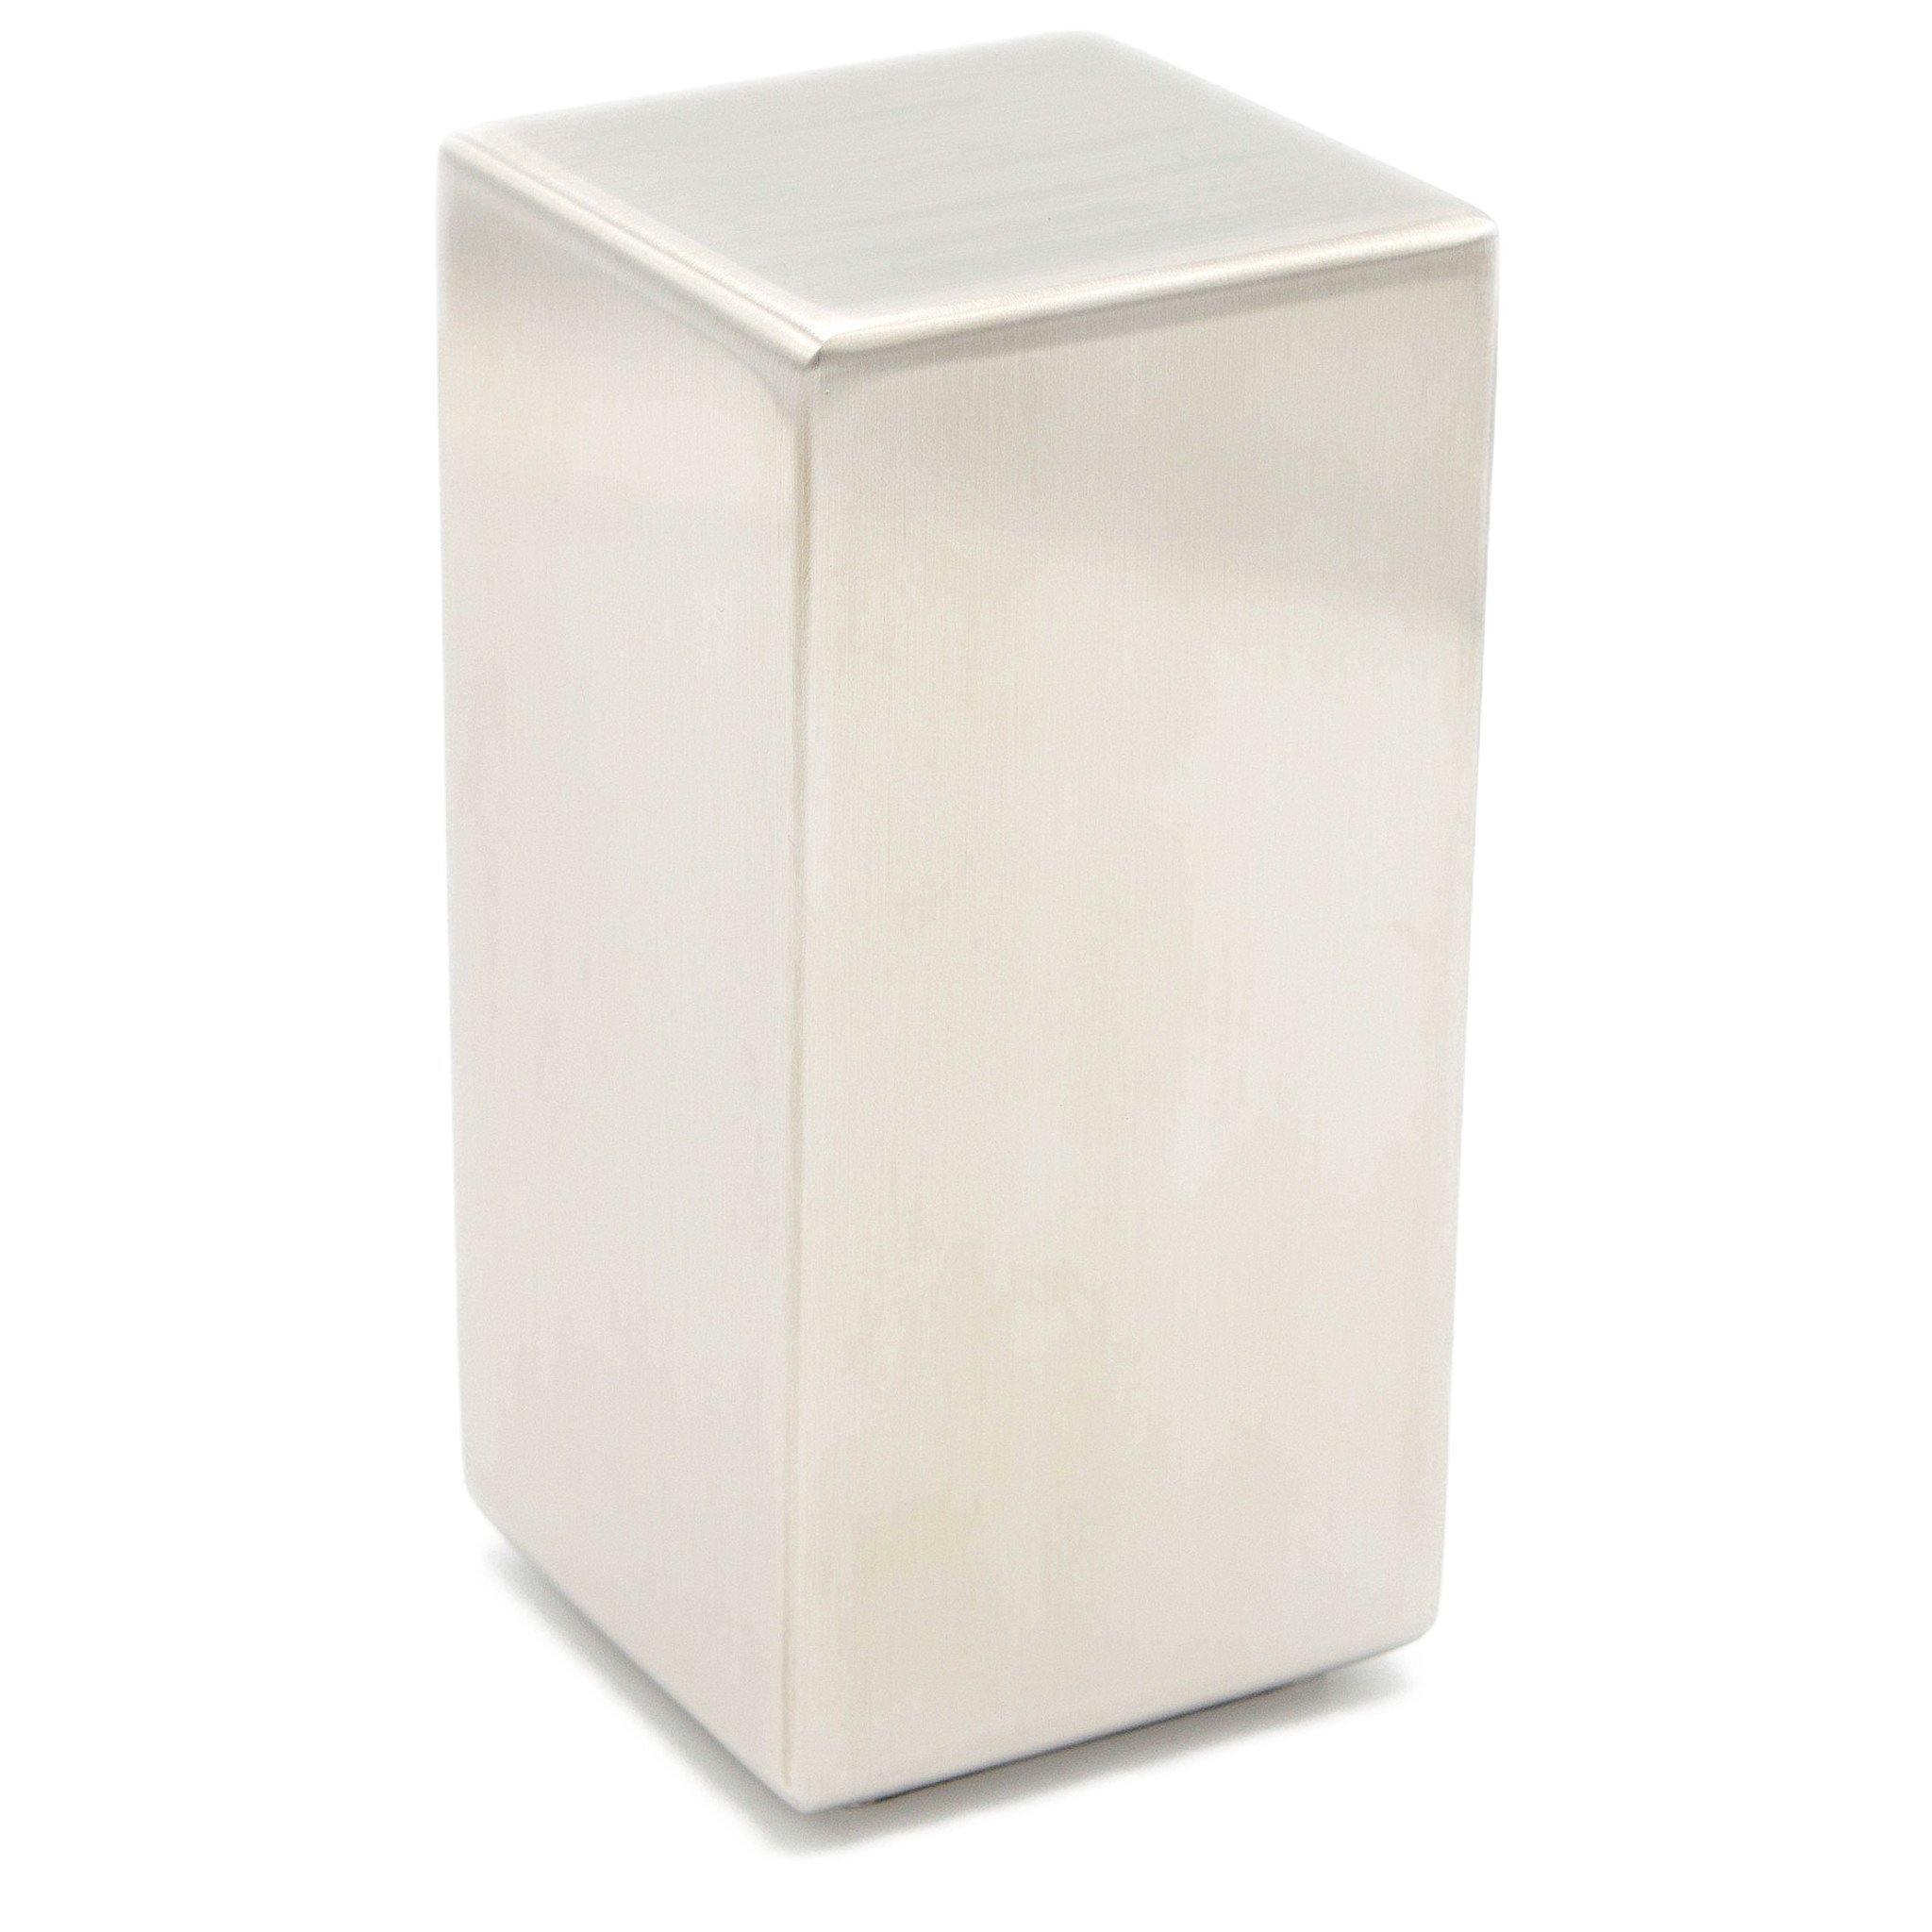 Bourne Column Large Stainless Steel Cremation Ashes Urn TOW